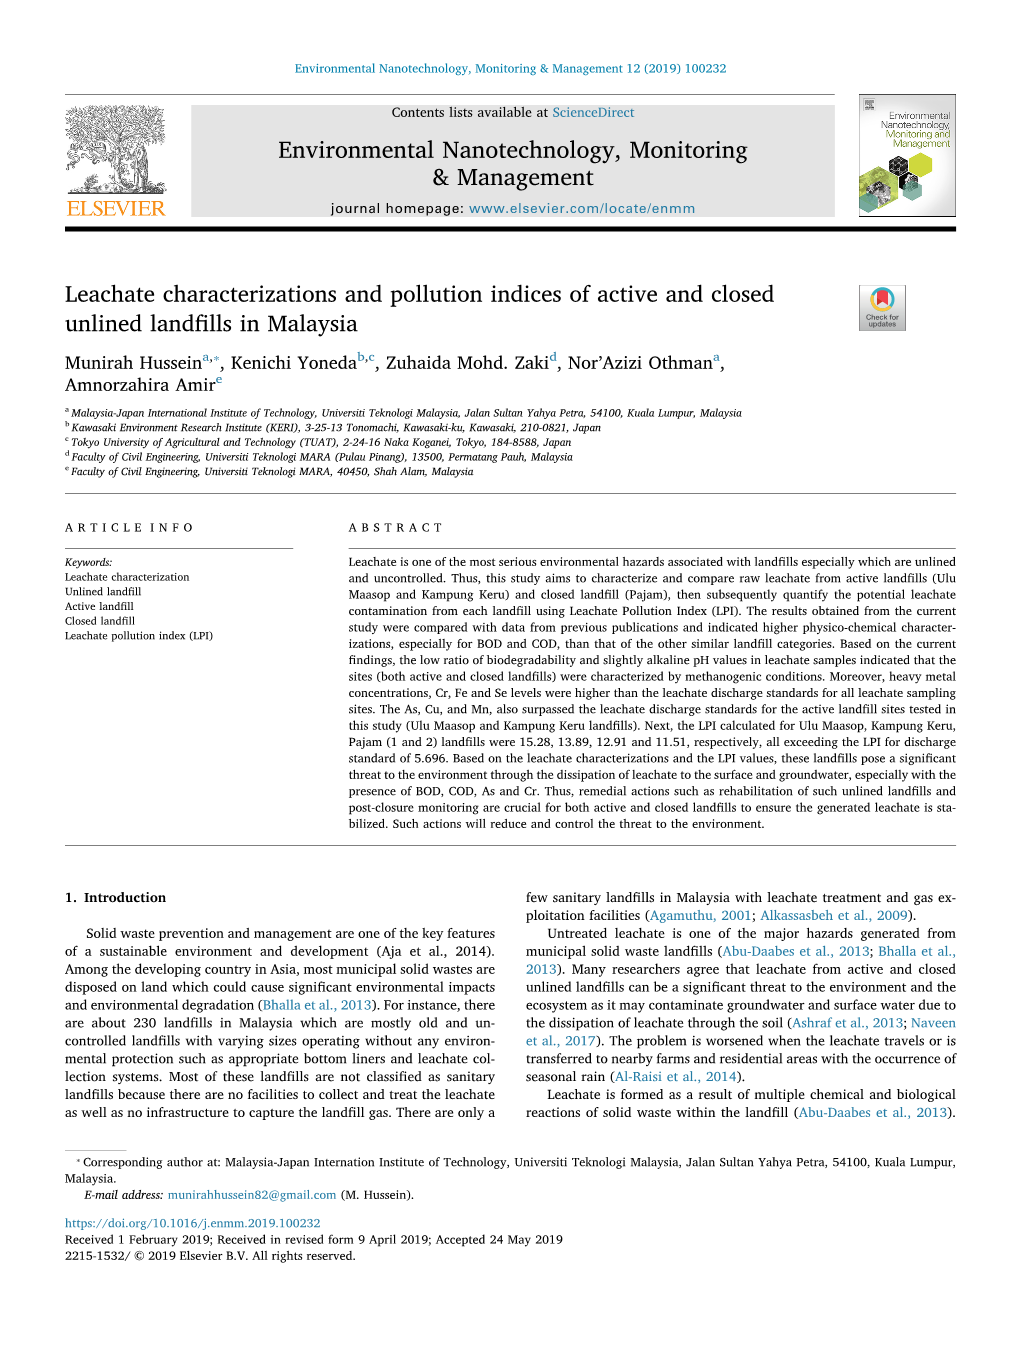 Leachate Characterizations and Pollution Indices of Active and Closed Unlined Landﬁlls in Malaysia T ⁎ Munirah Husseina, , Kenichi Yonedab,C, Zuhaida Mohd